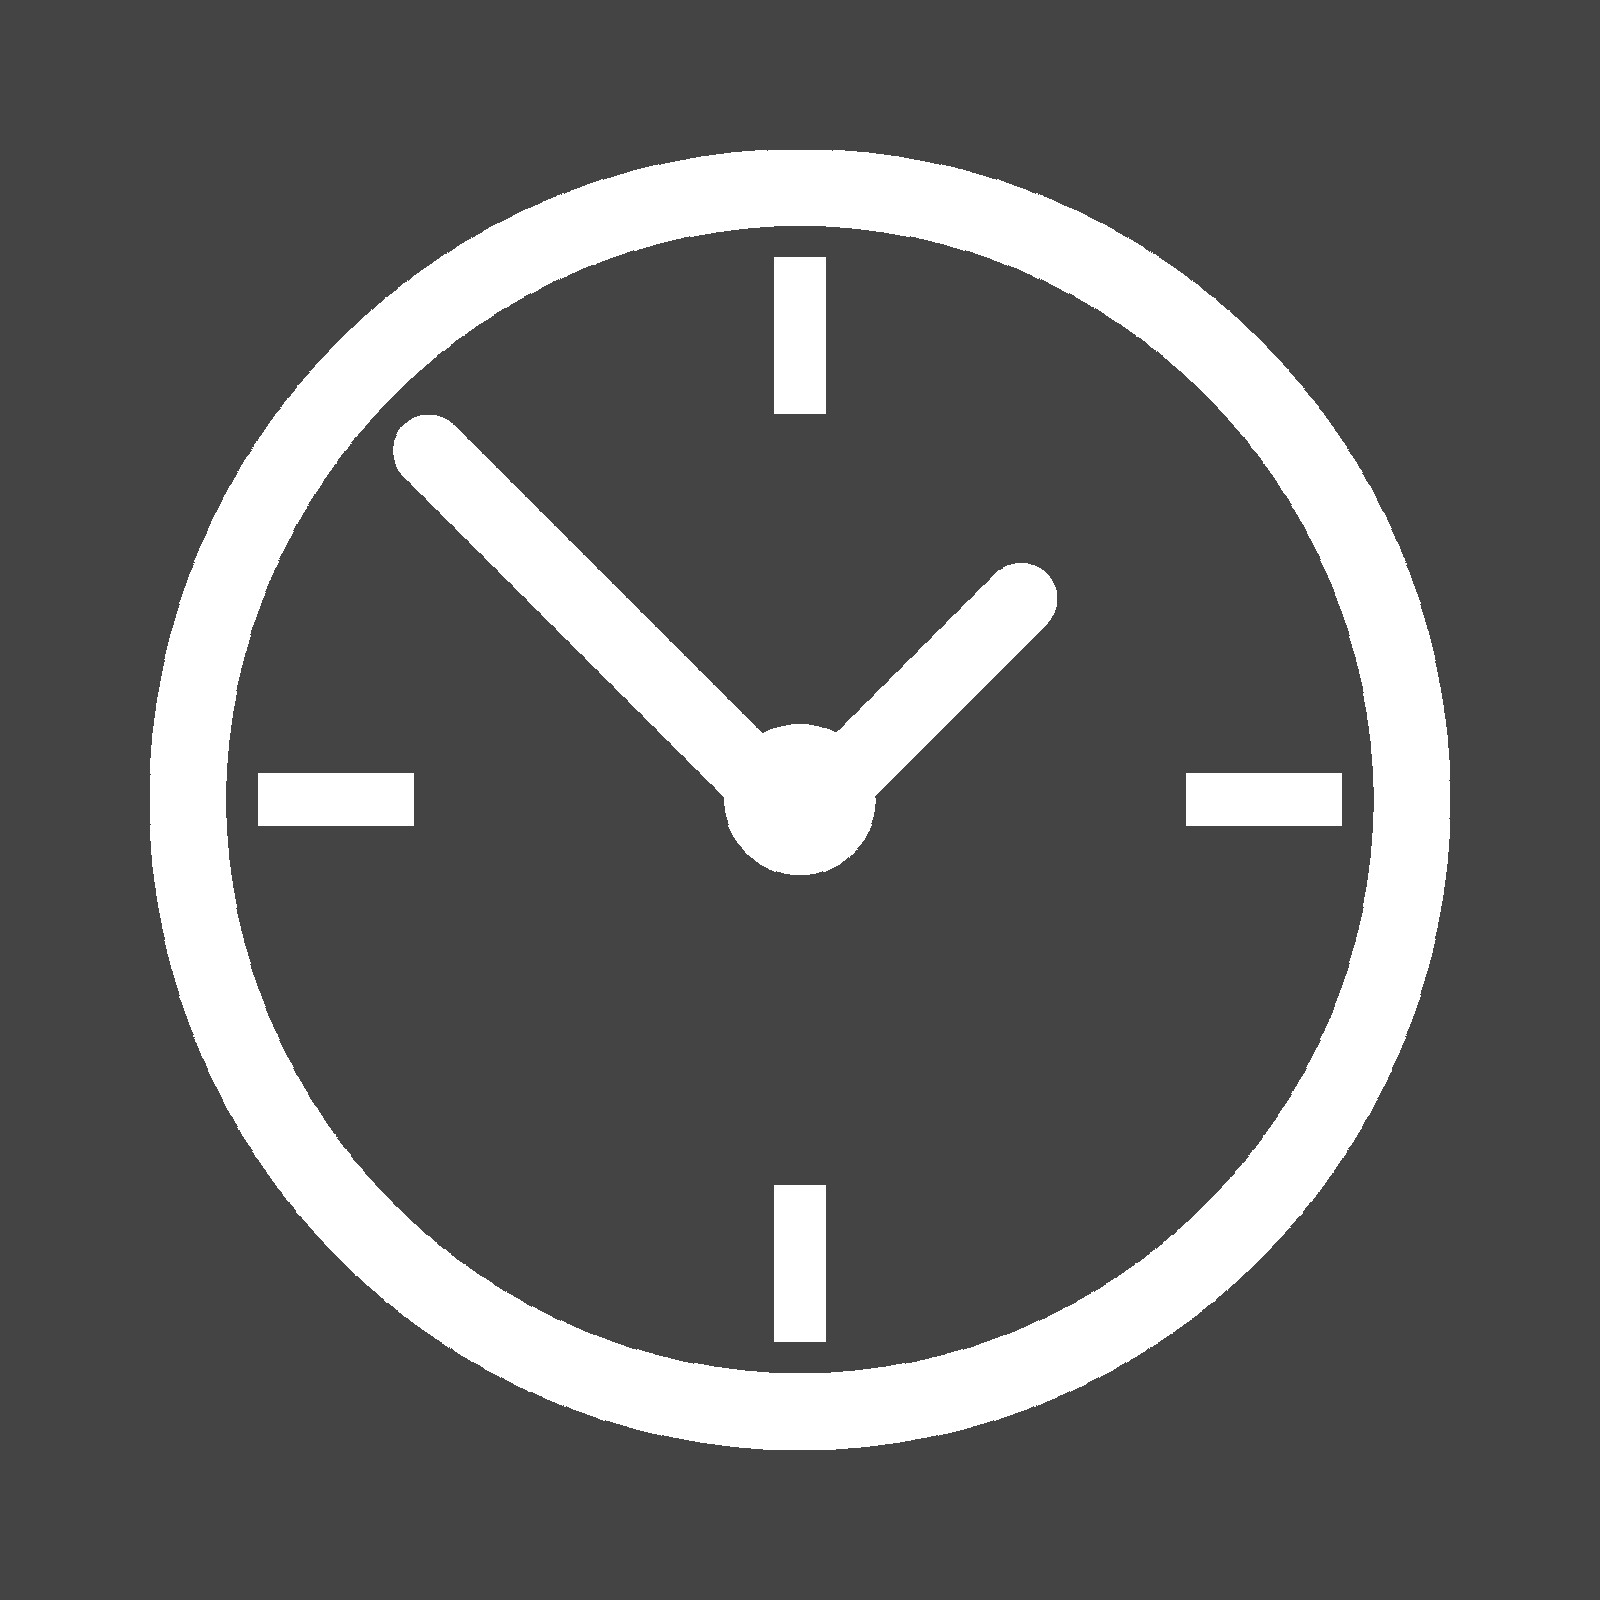 Icon showing a clock to convey time